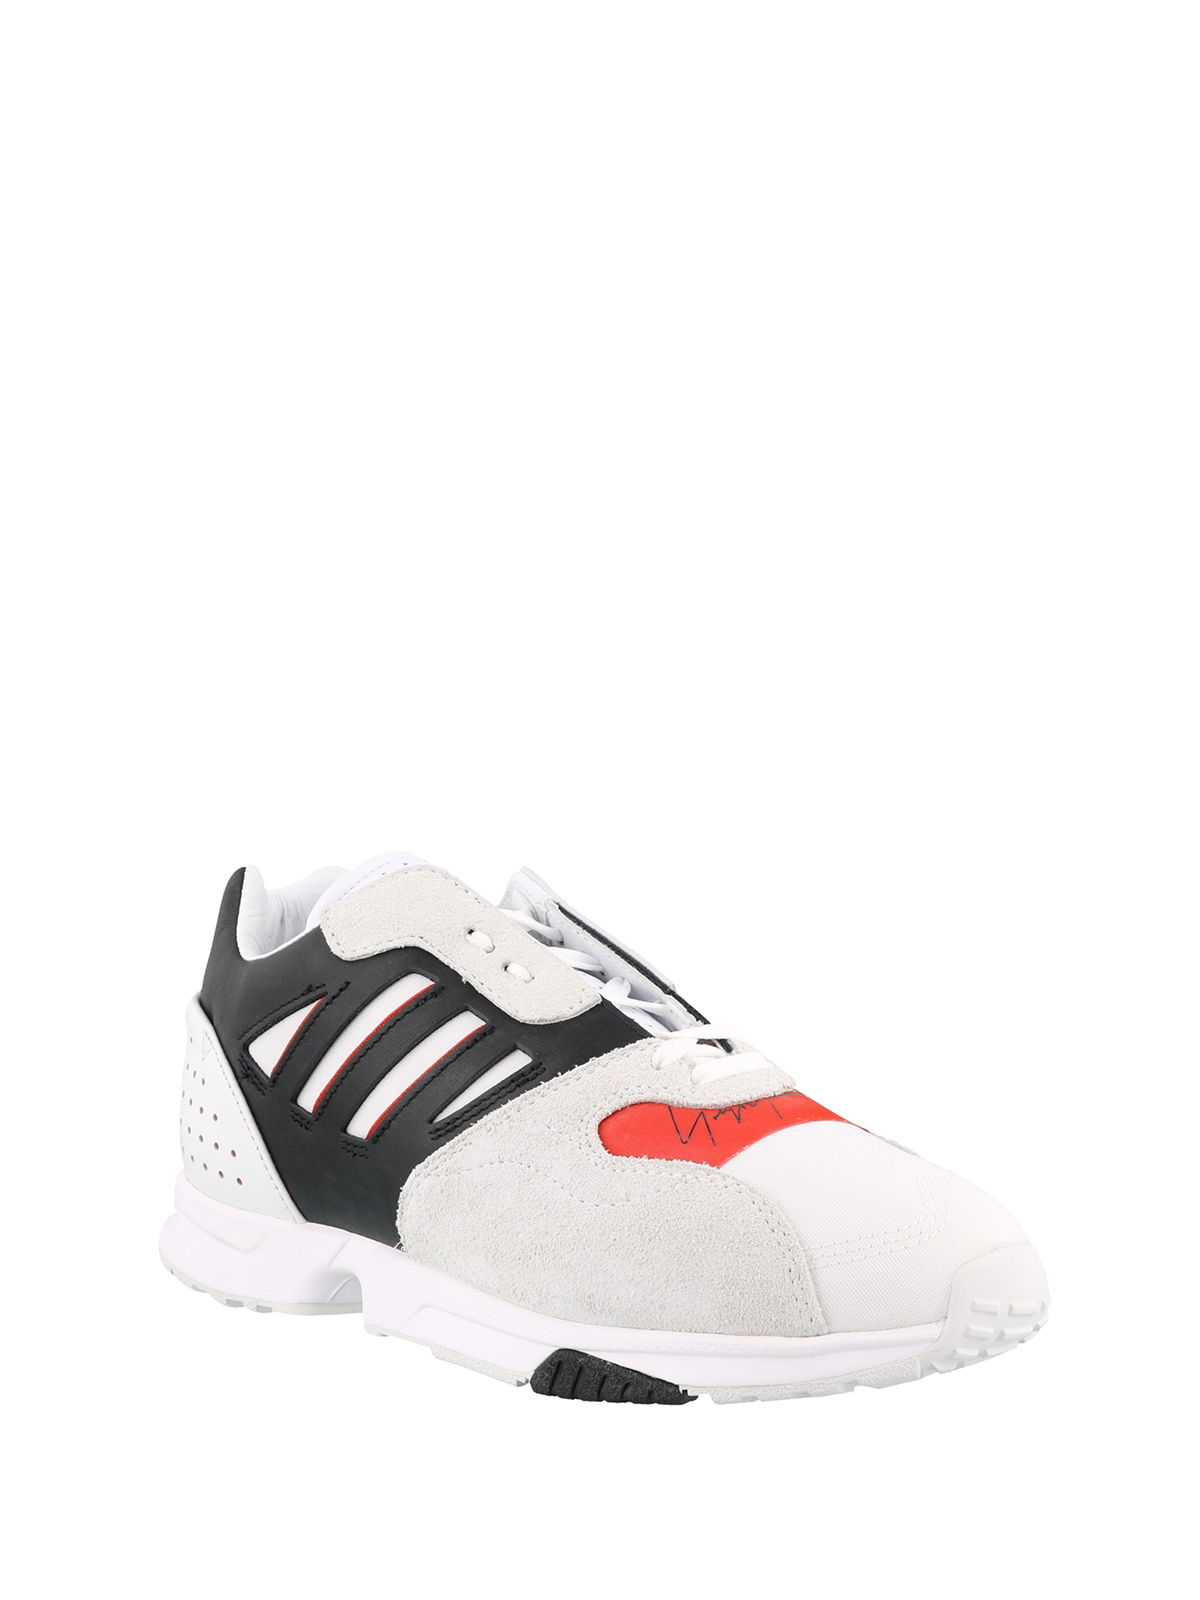 Adidas Y-3 - Multi fabric running sneakers - trainers - G54063 | iKRIX.com